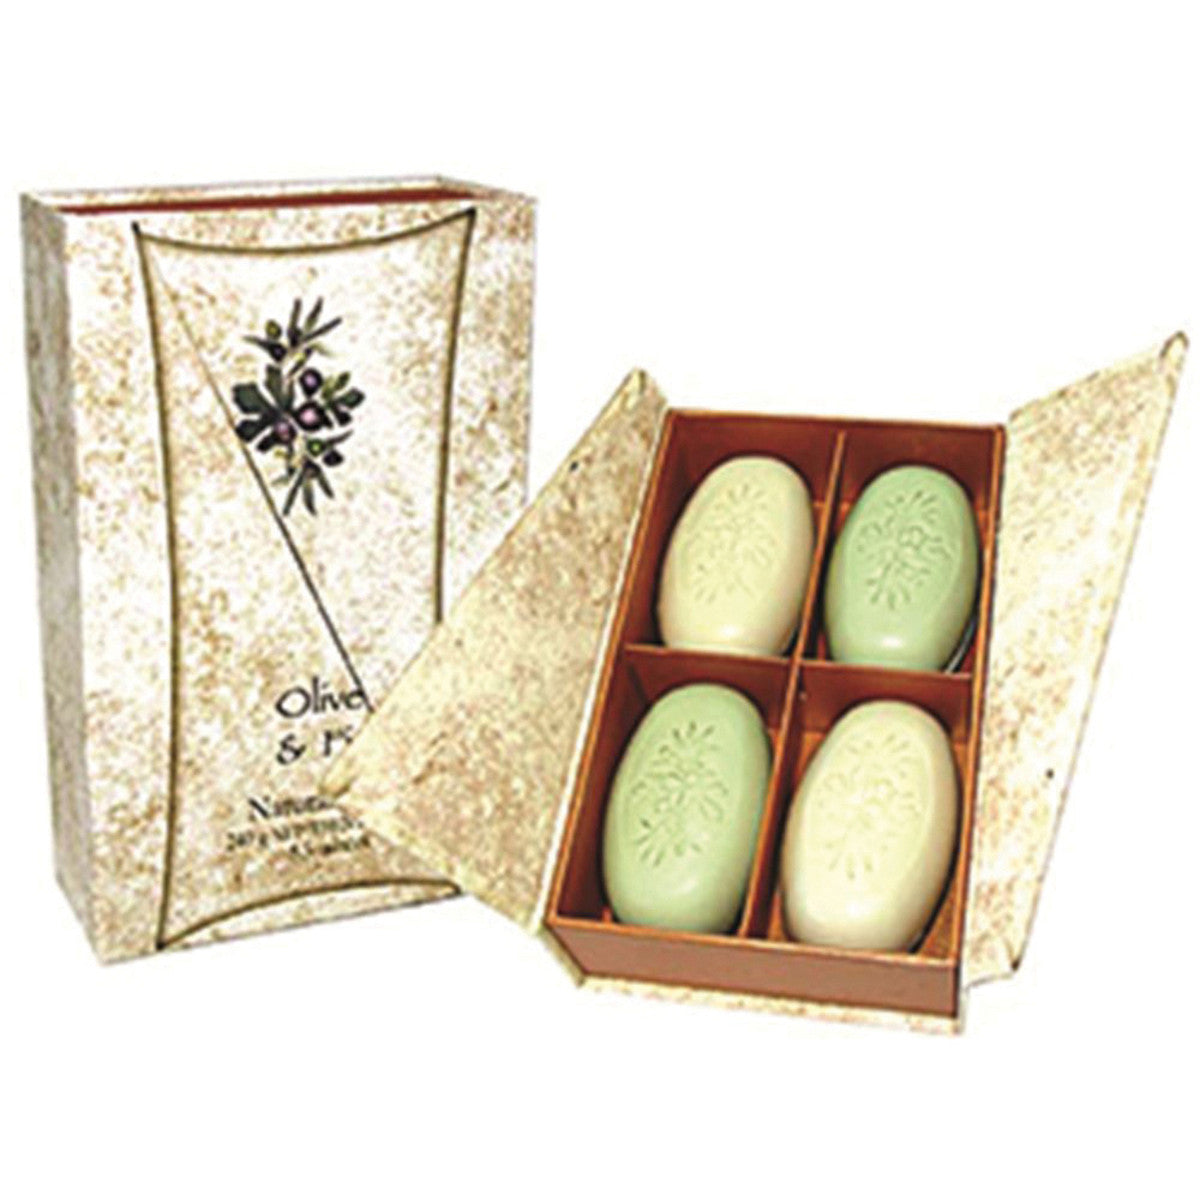 Clover Fields - Olive and Fig Boxed Soap x 4 Pack